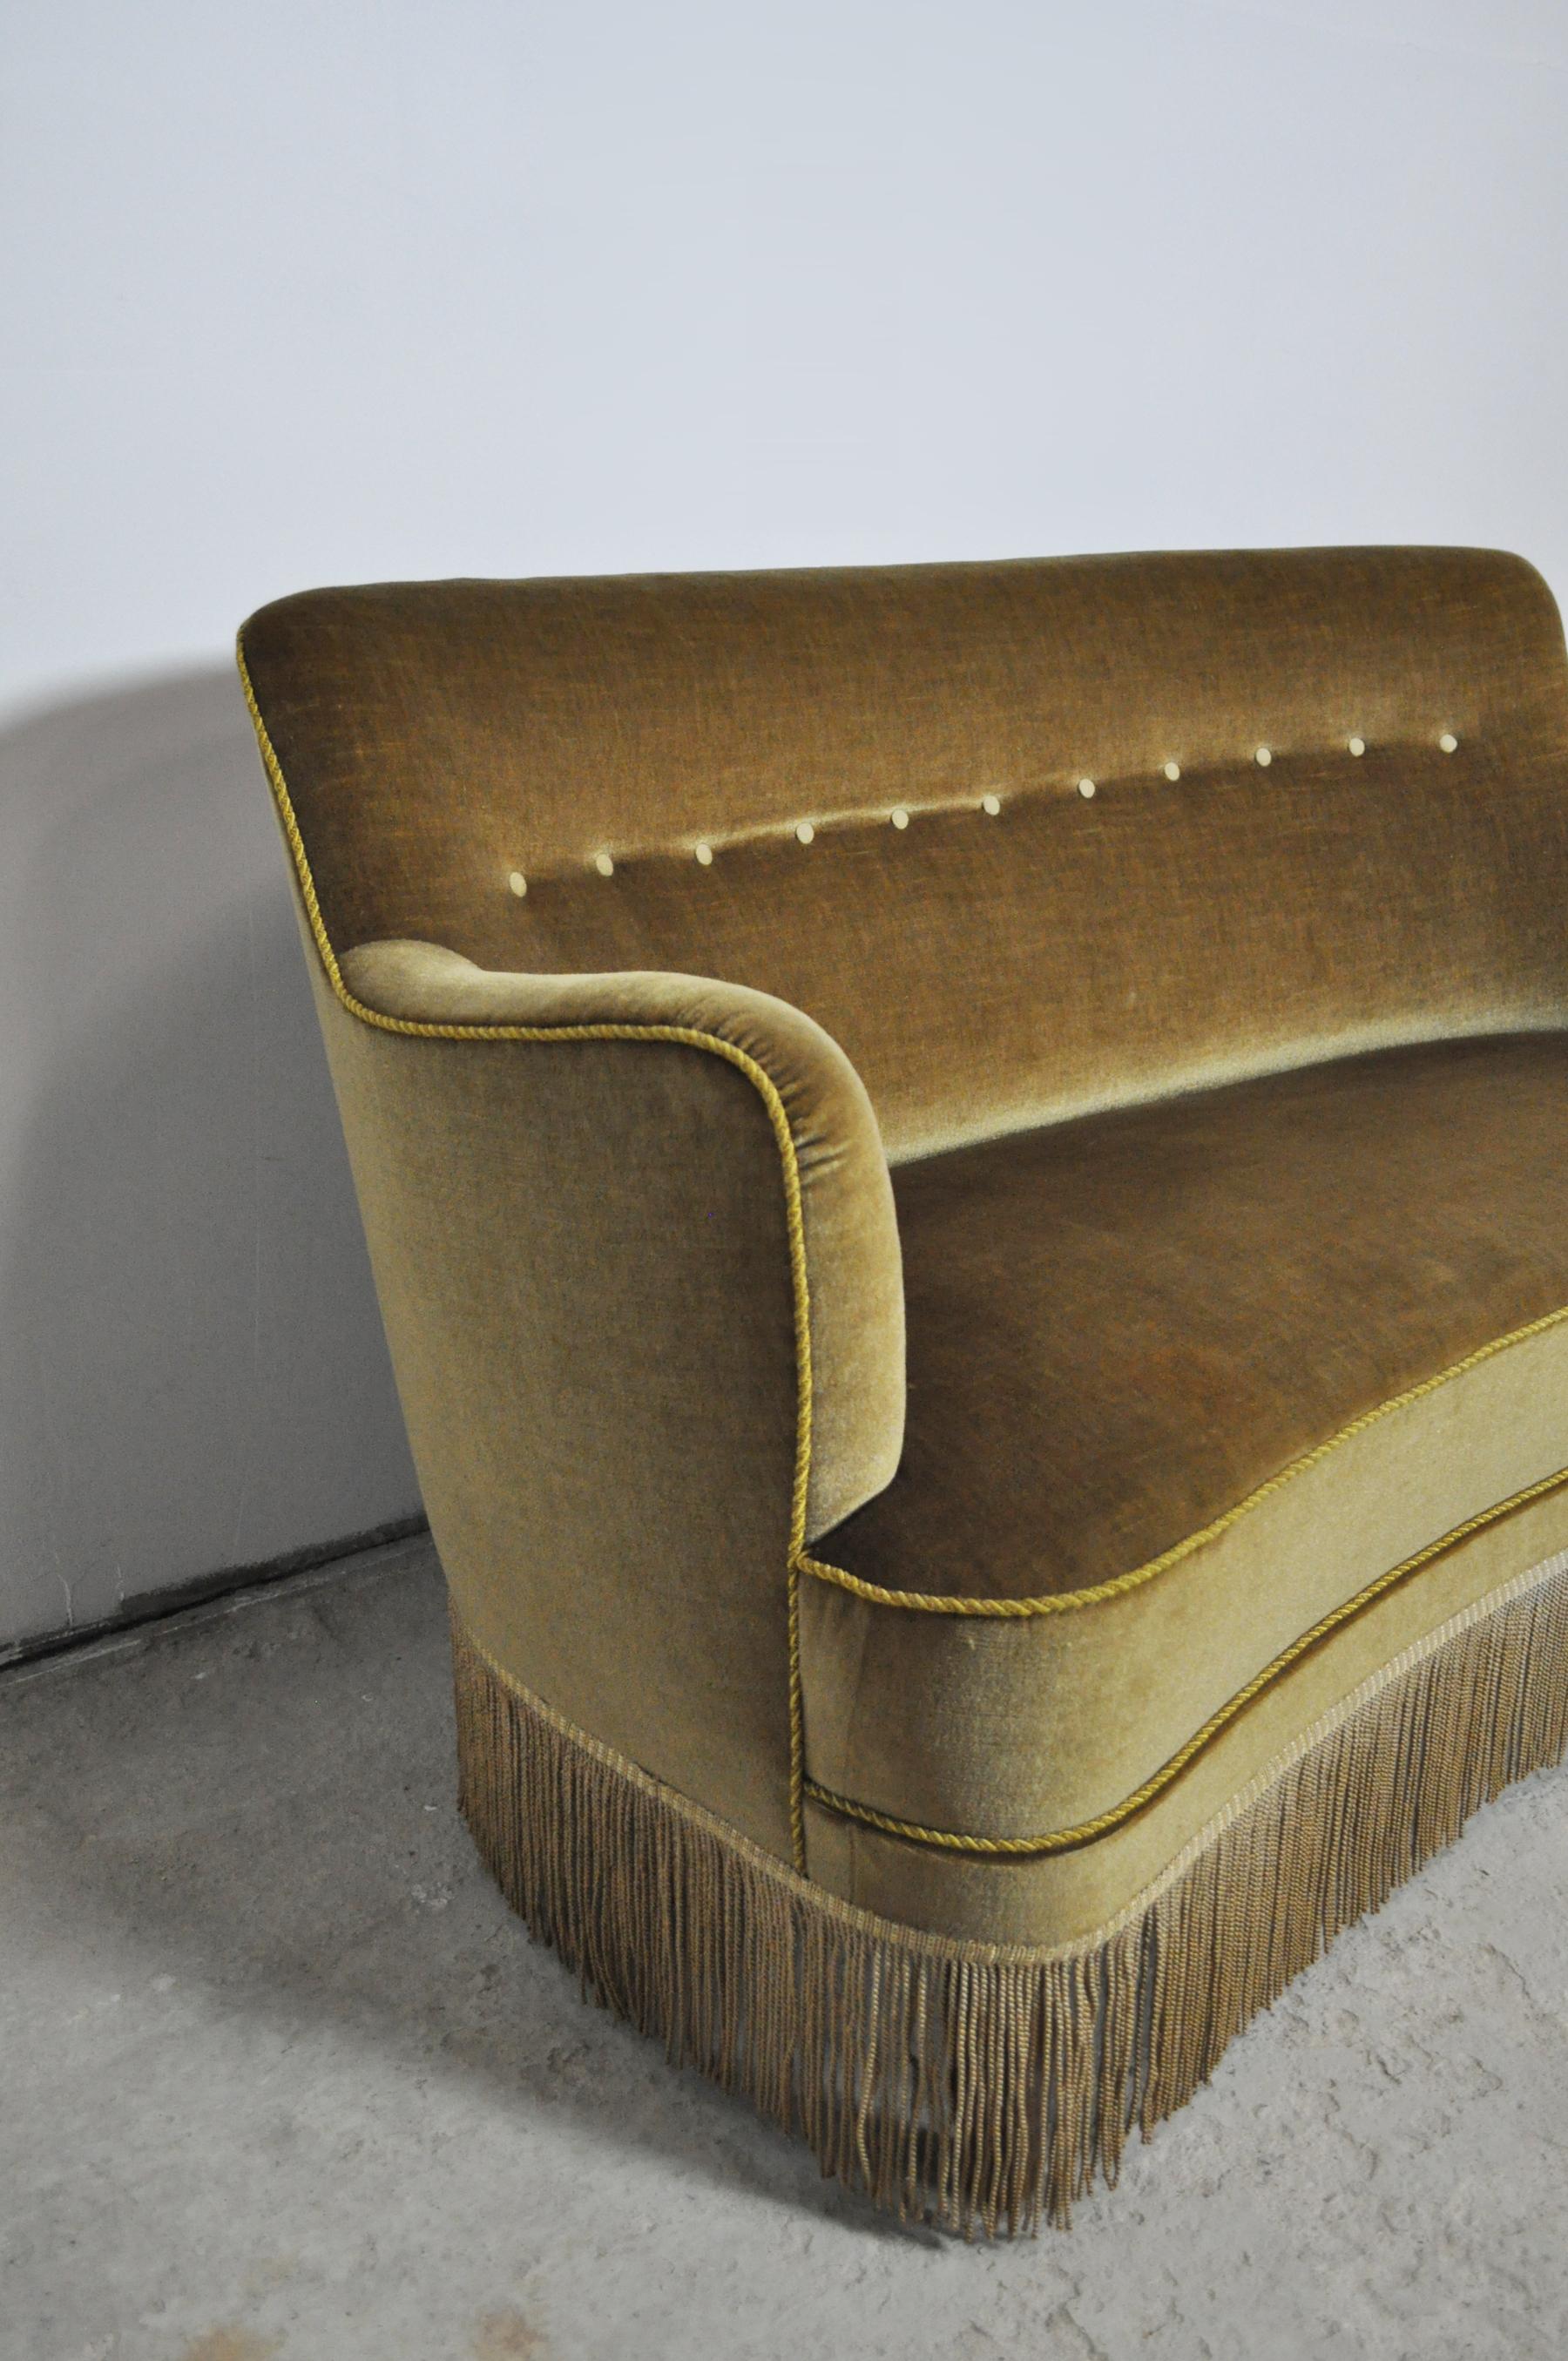 Curved Early 20th Century Sofa with Original Upholstery in Green and Yellow Tone 2